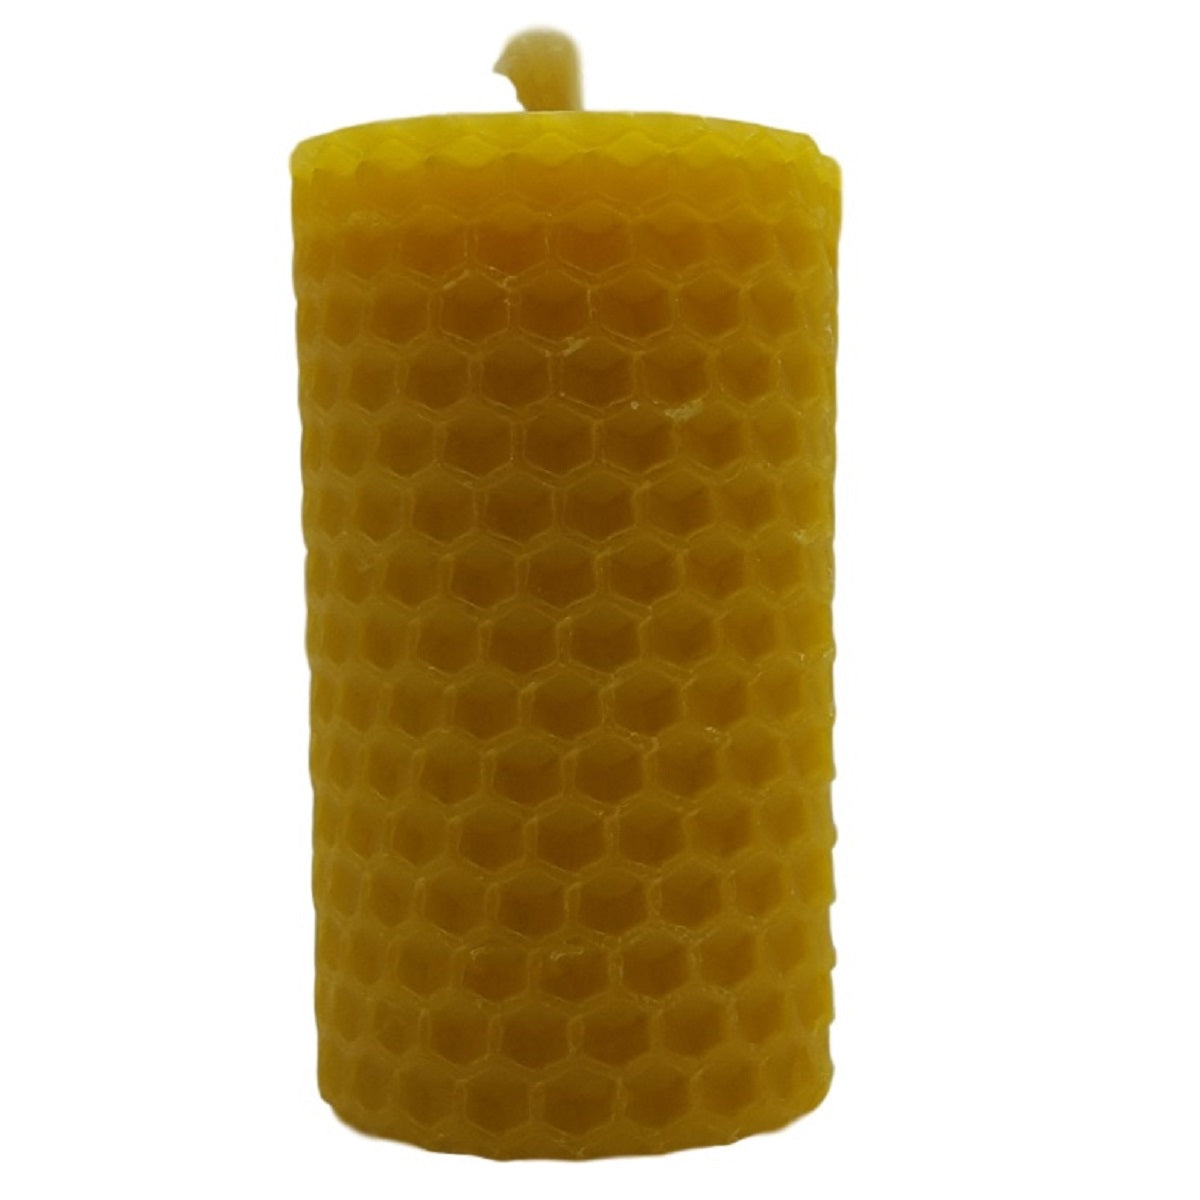 Trish&#39;s Honey Products All Natural Beeswax Candle 5 to 6 hour